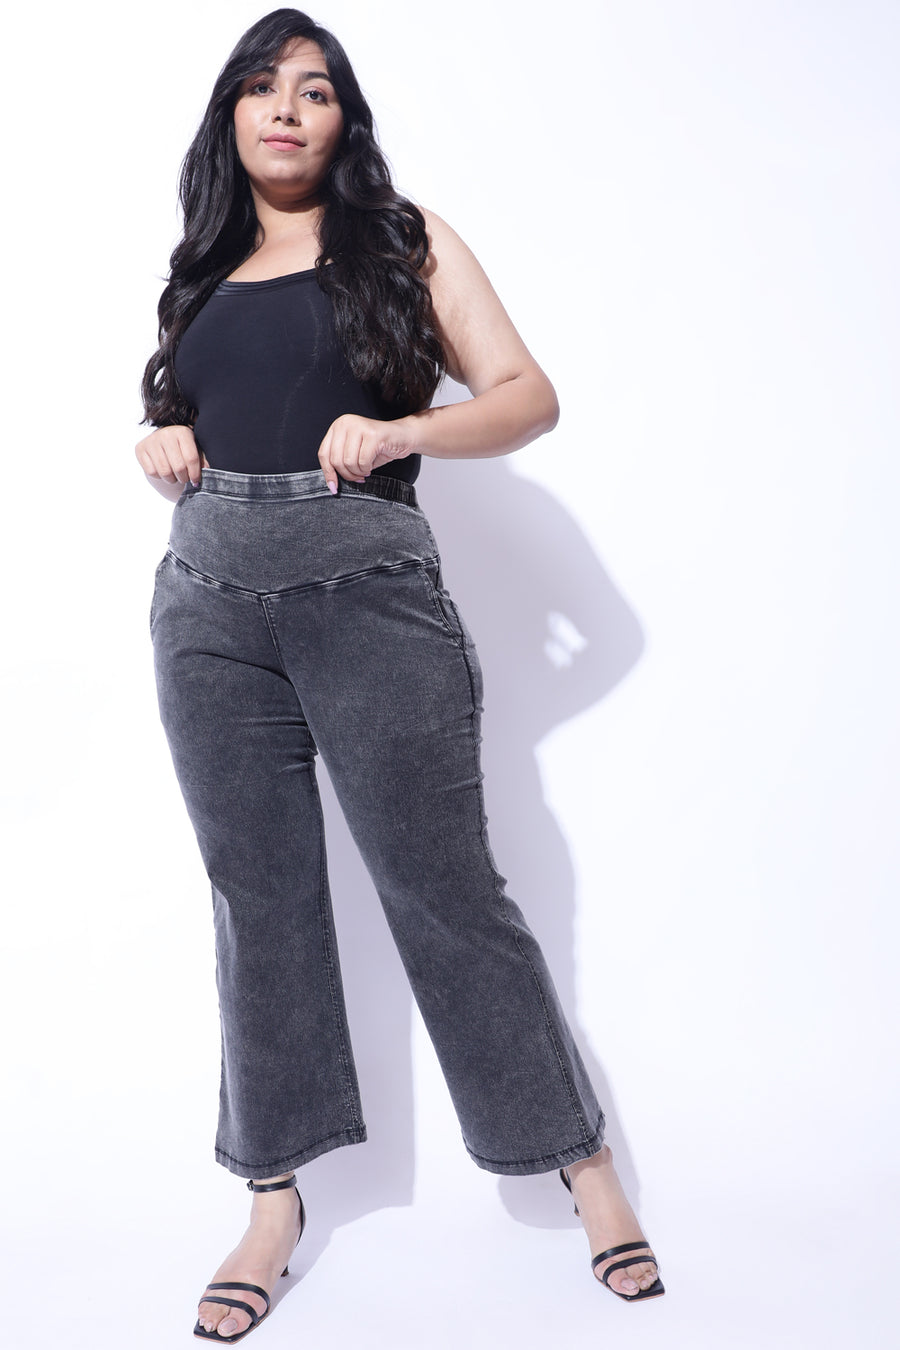 Shop Stylish Pair Of All Plus Size Jeans For Women in India @Amydus